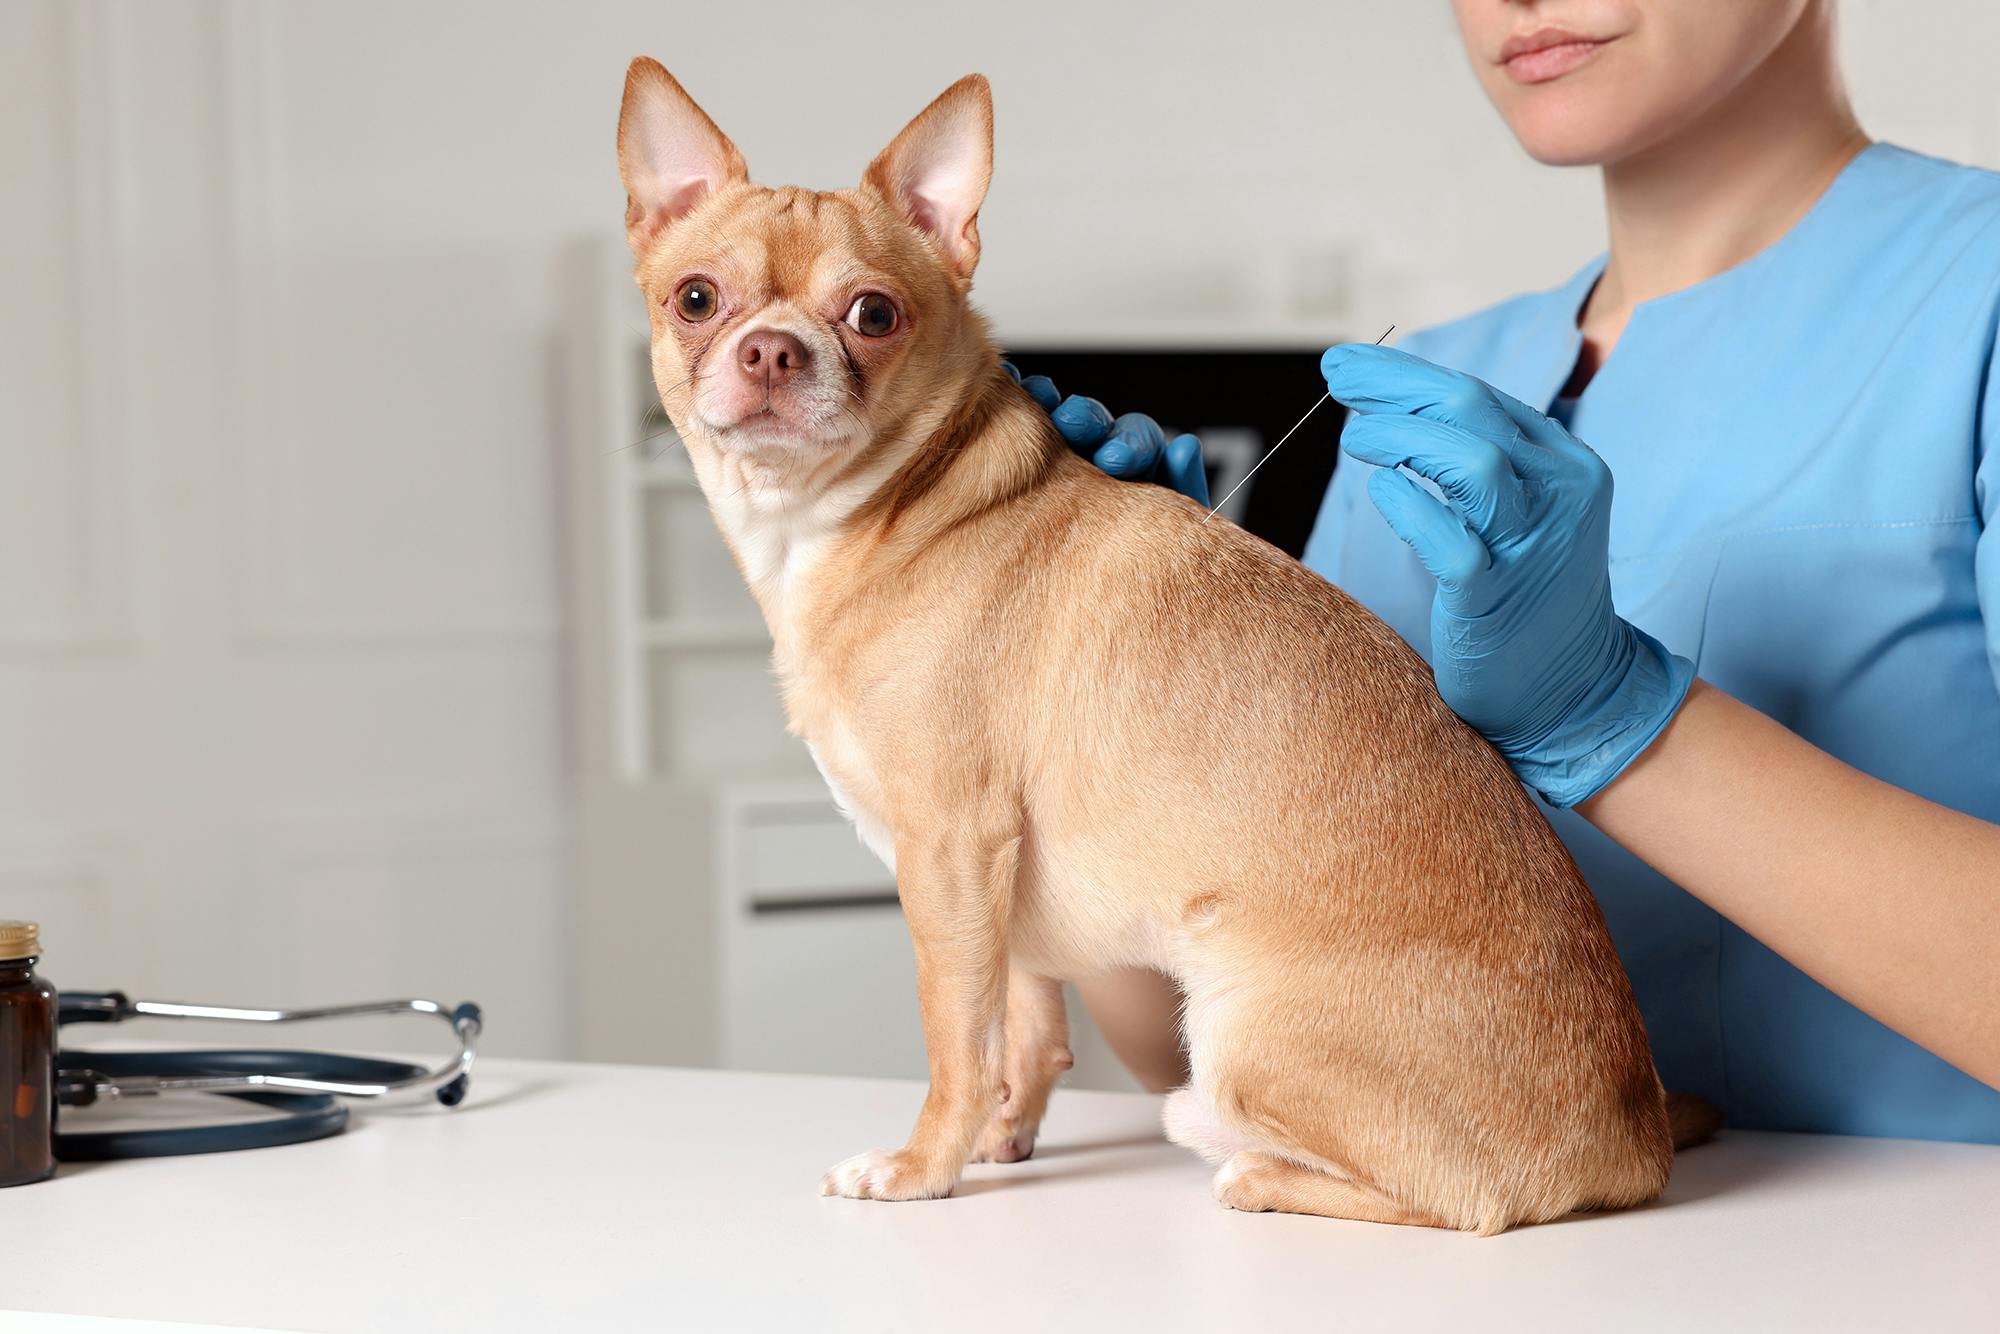 Chihuahua getting acupuncture at the veterinarian's office.